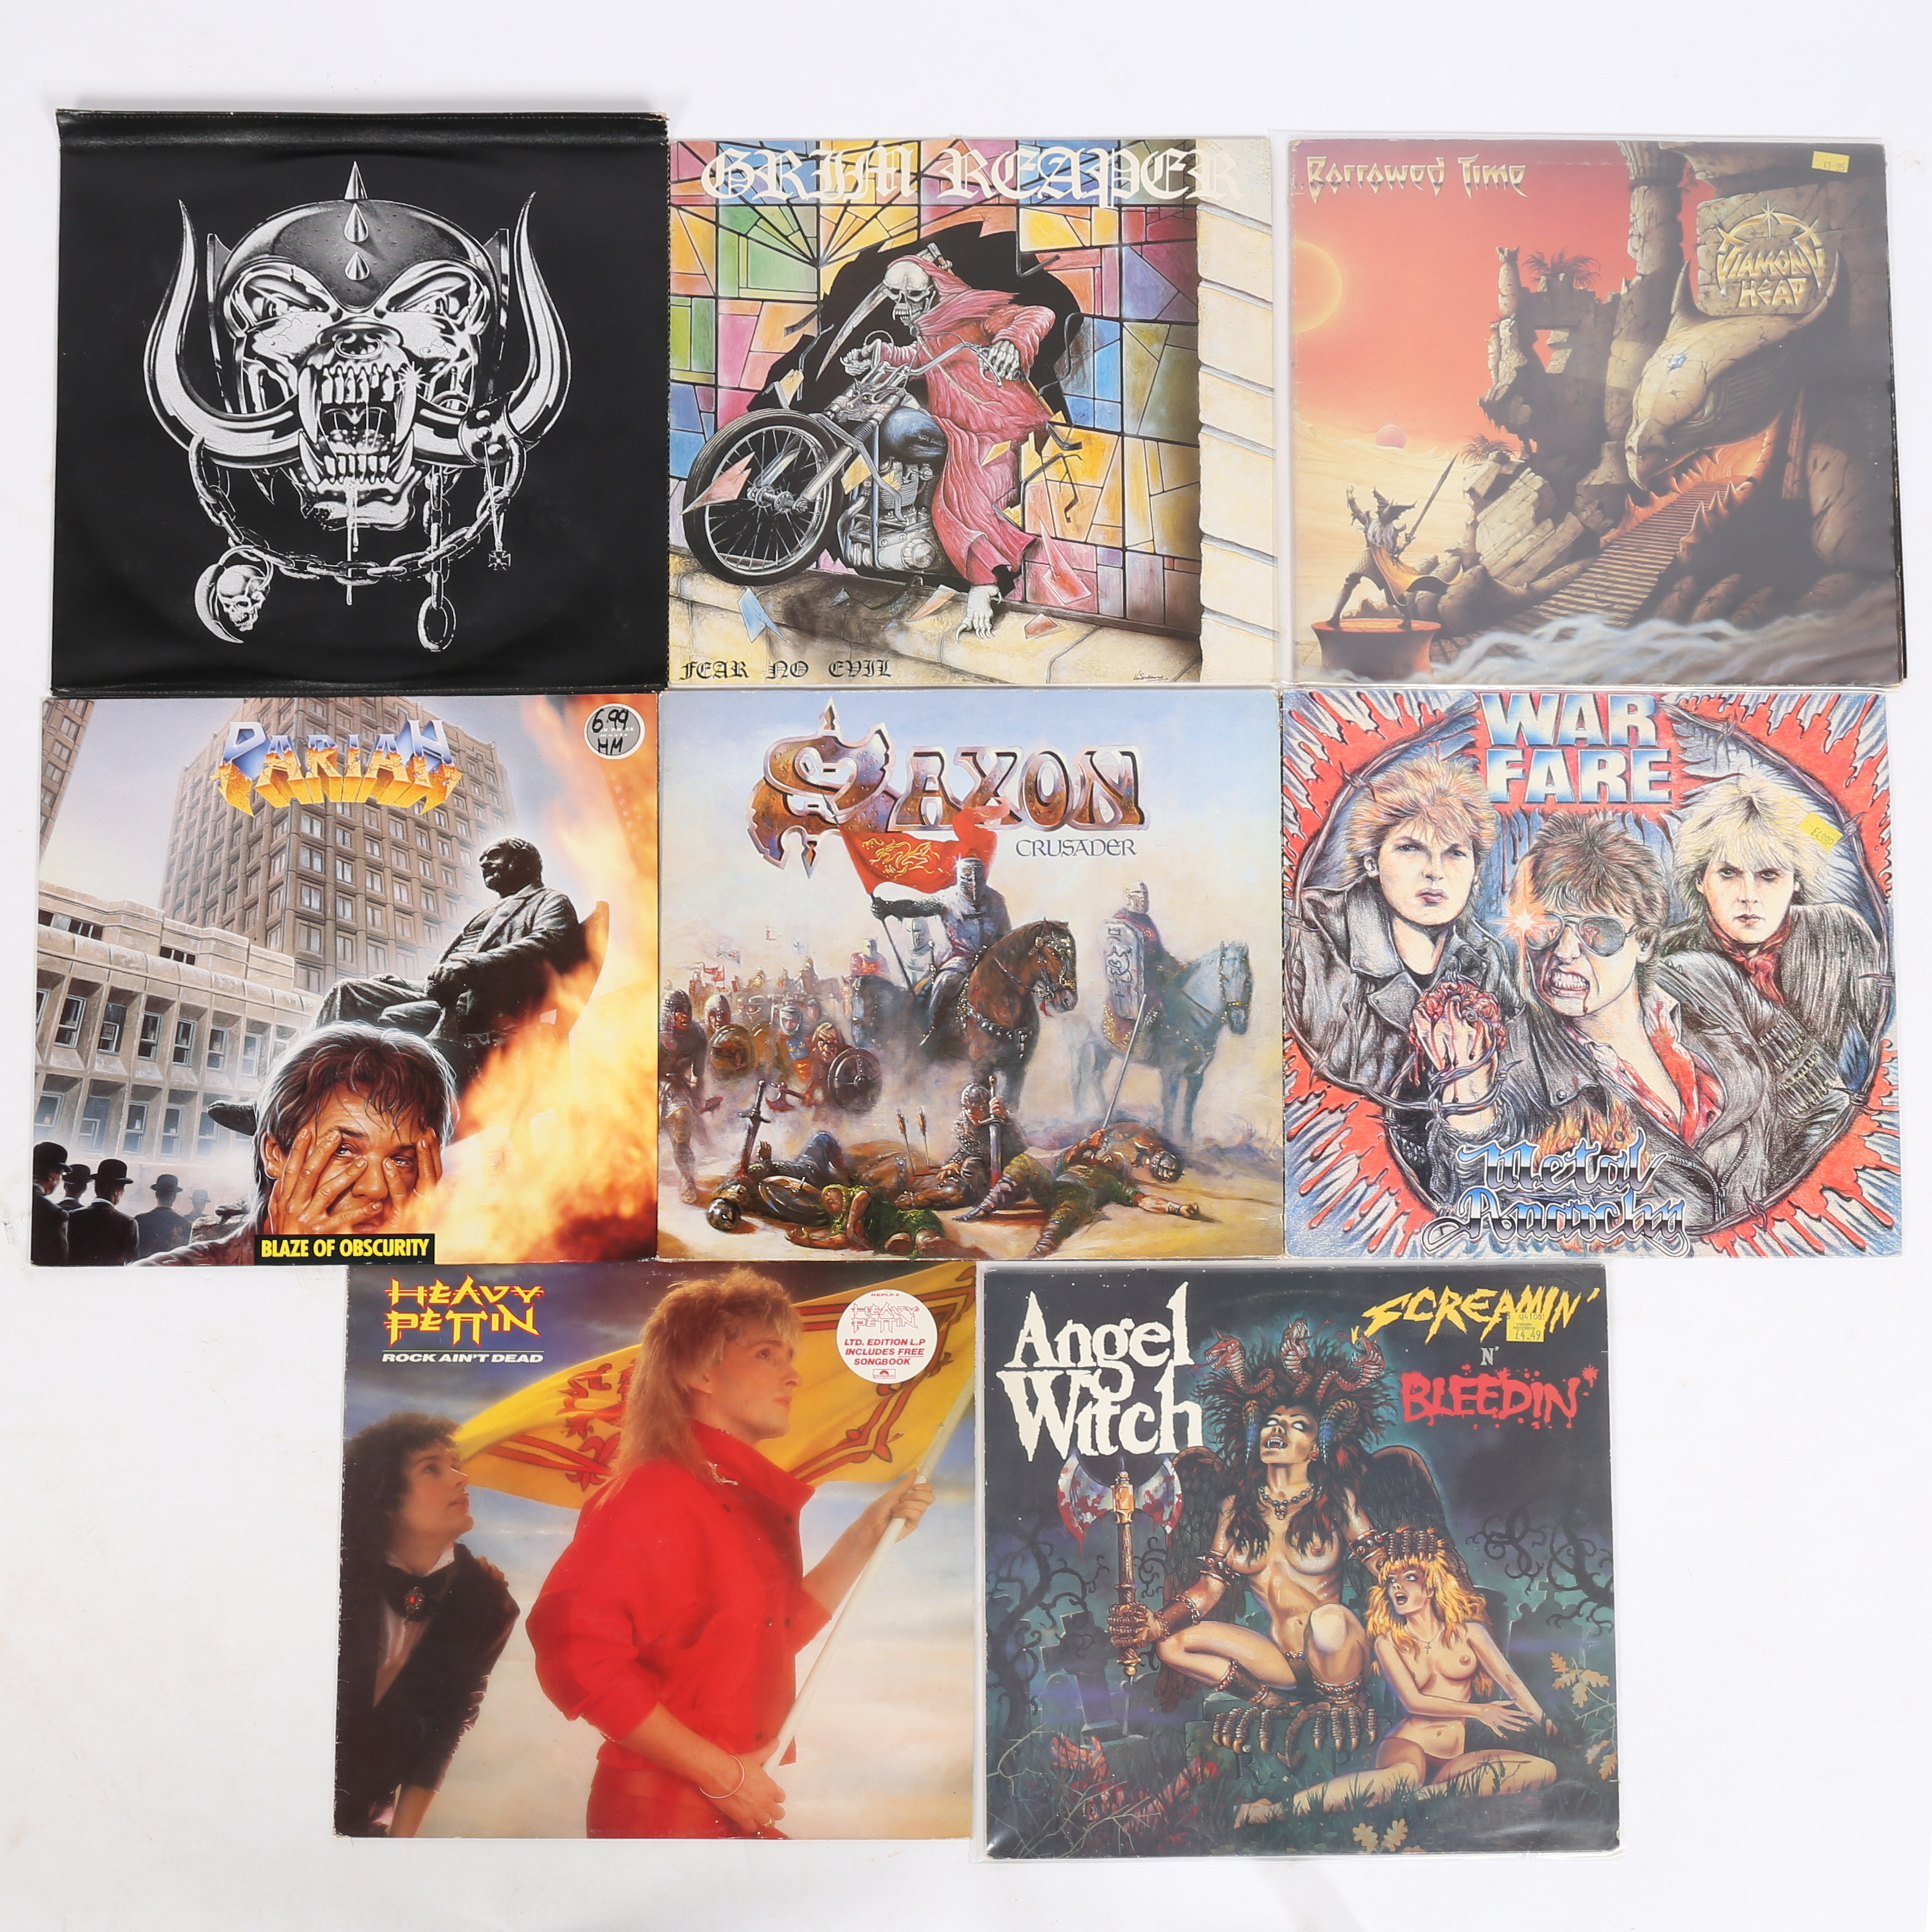 NEW WAVE OF BRITISH HEAVY METAL - LP COLLECTION.